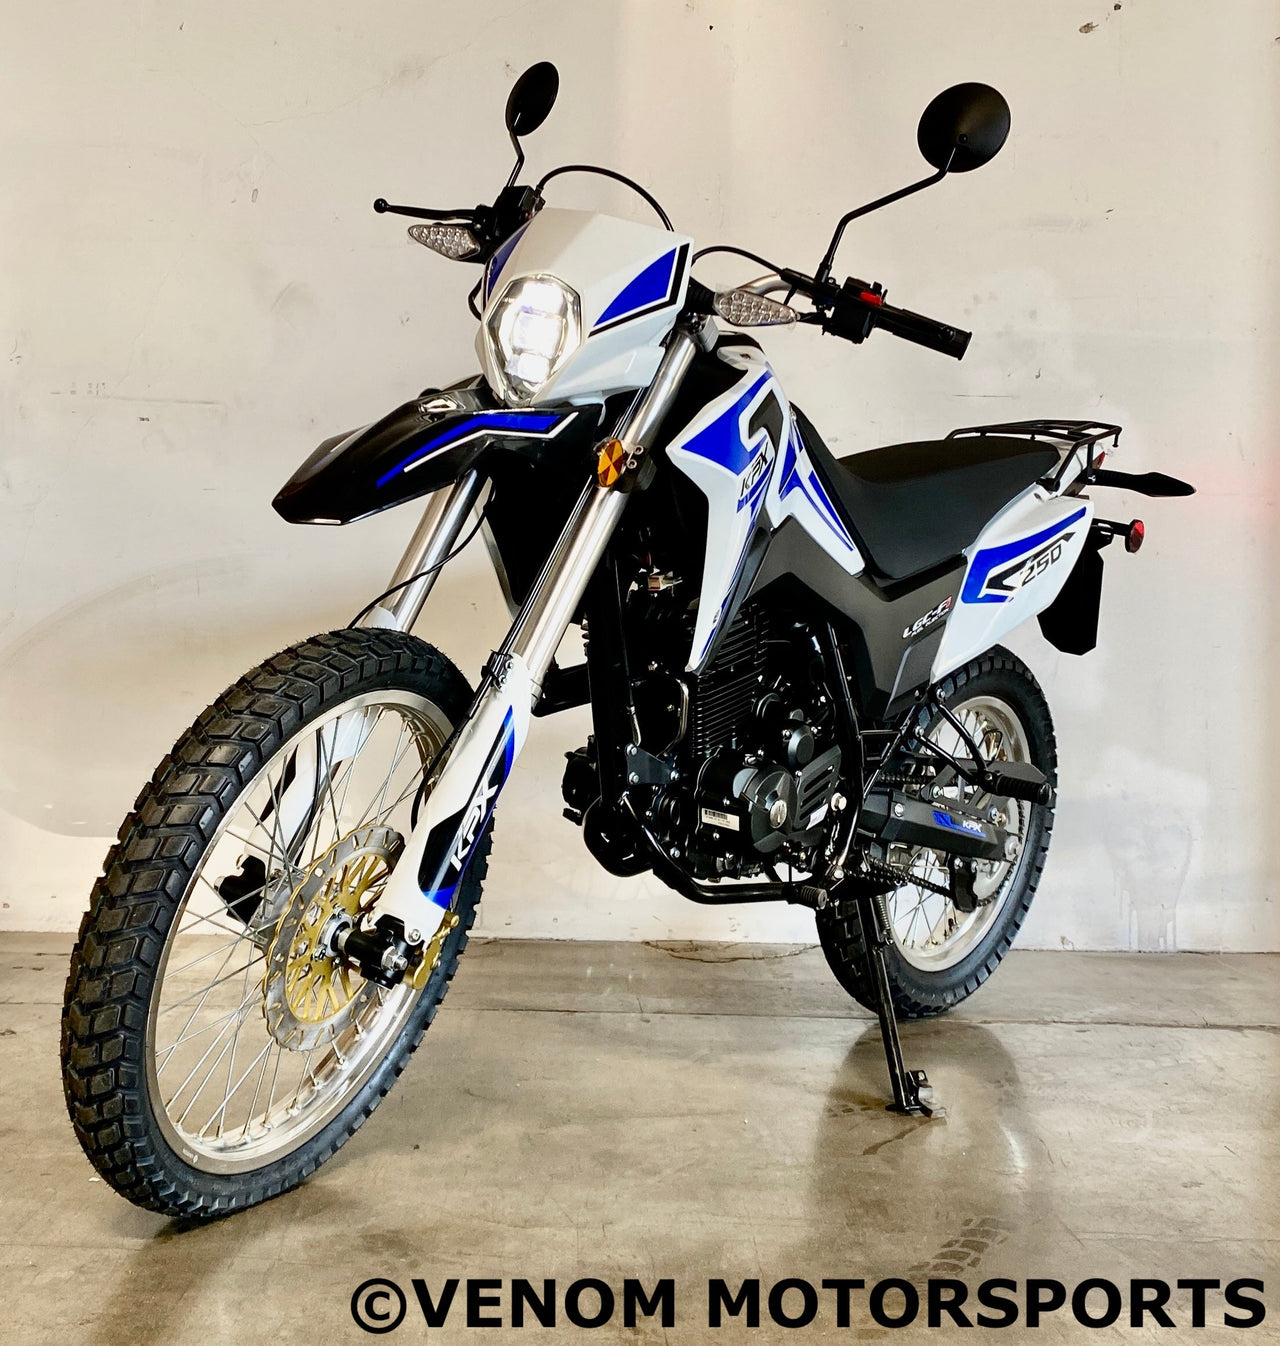 Lifan KPX 250 | 250cc Dual Sport Motorcycle | Fuel Injected | Street Legal